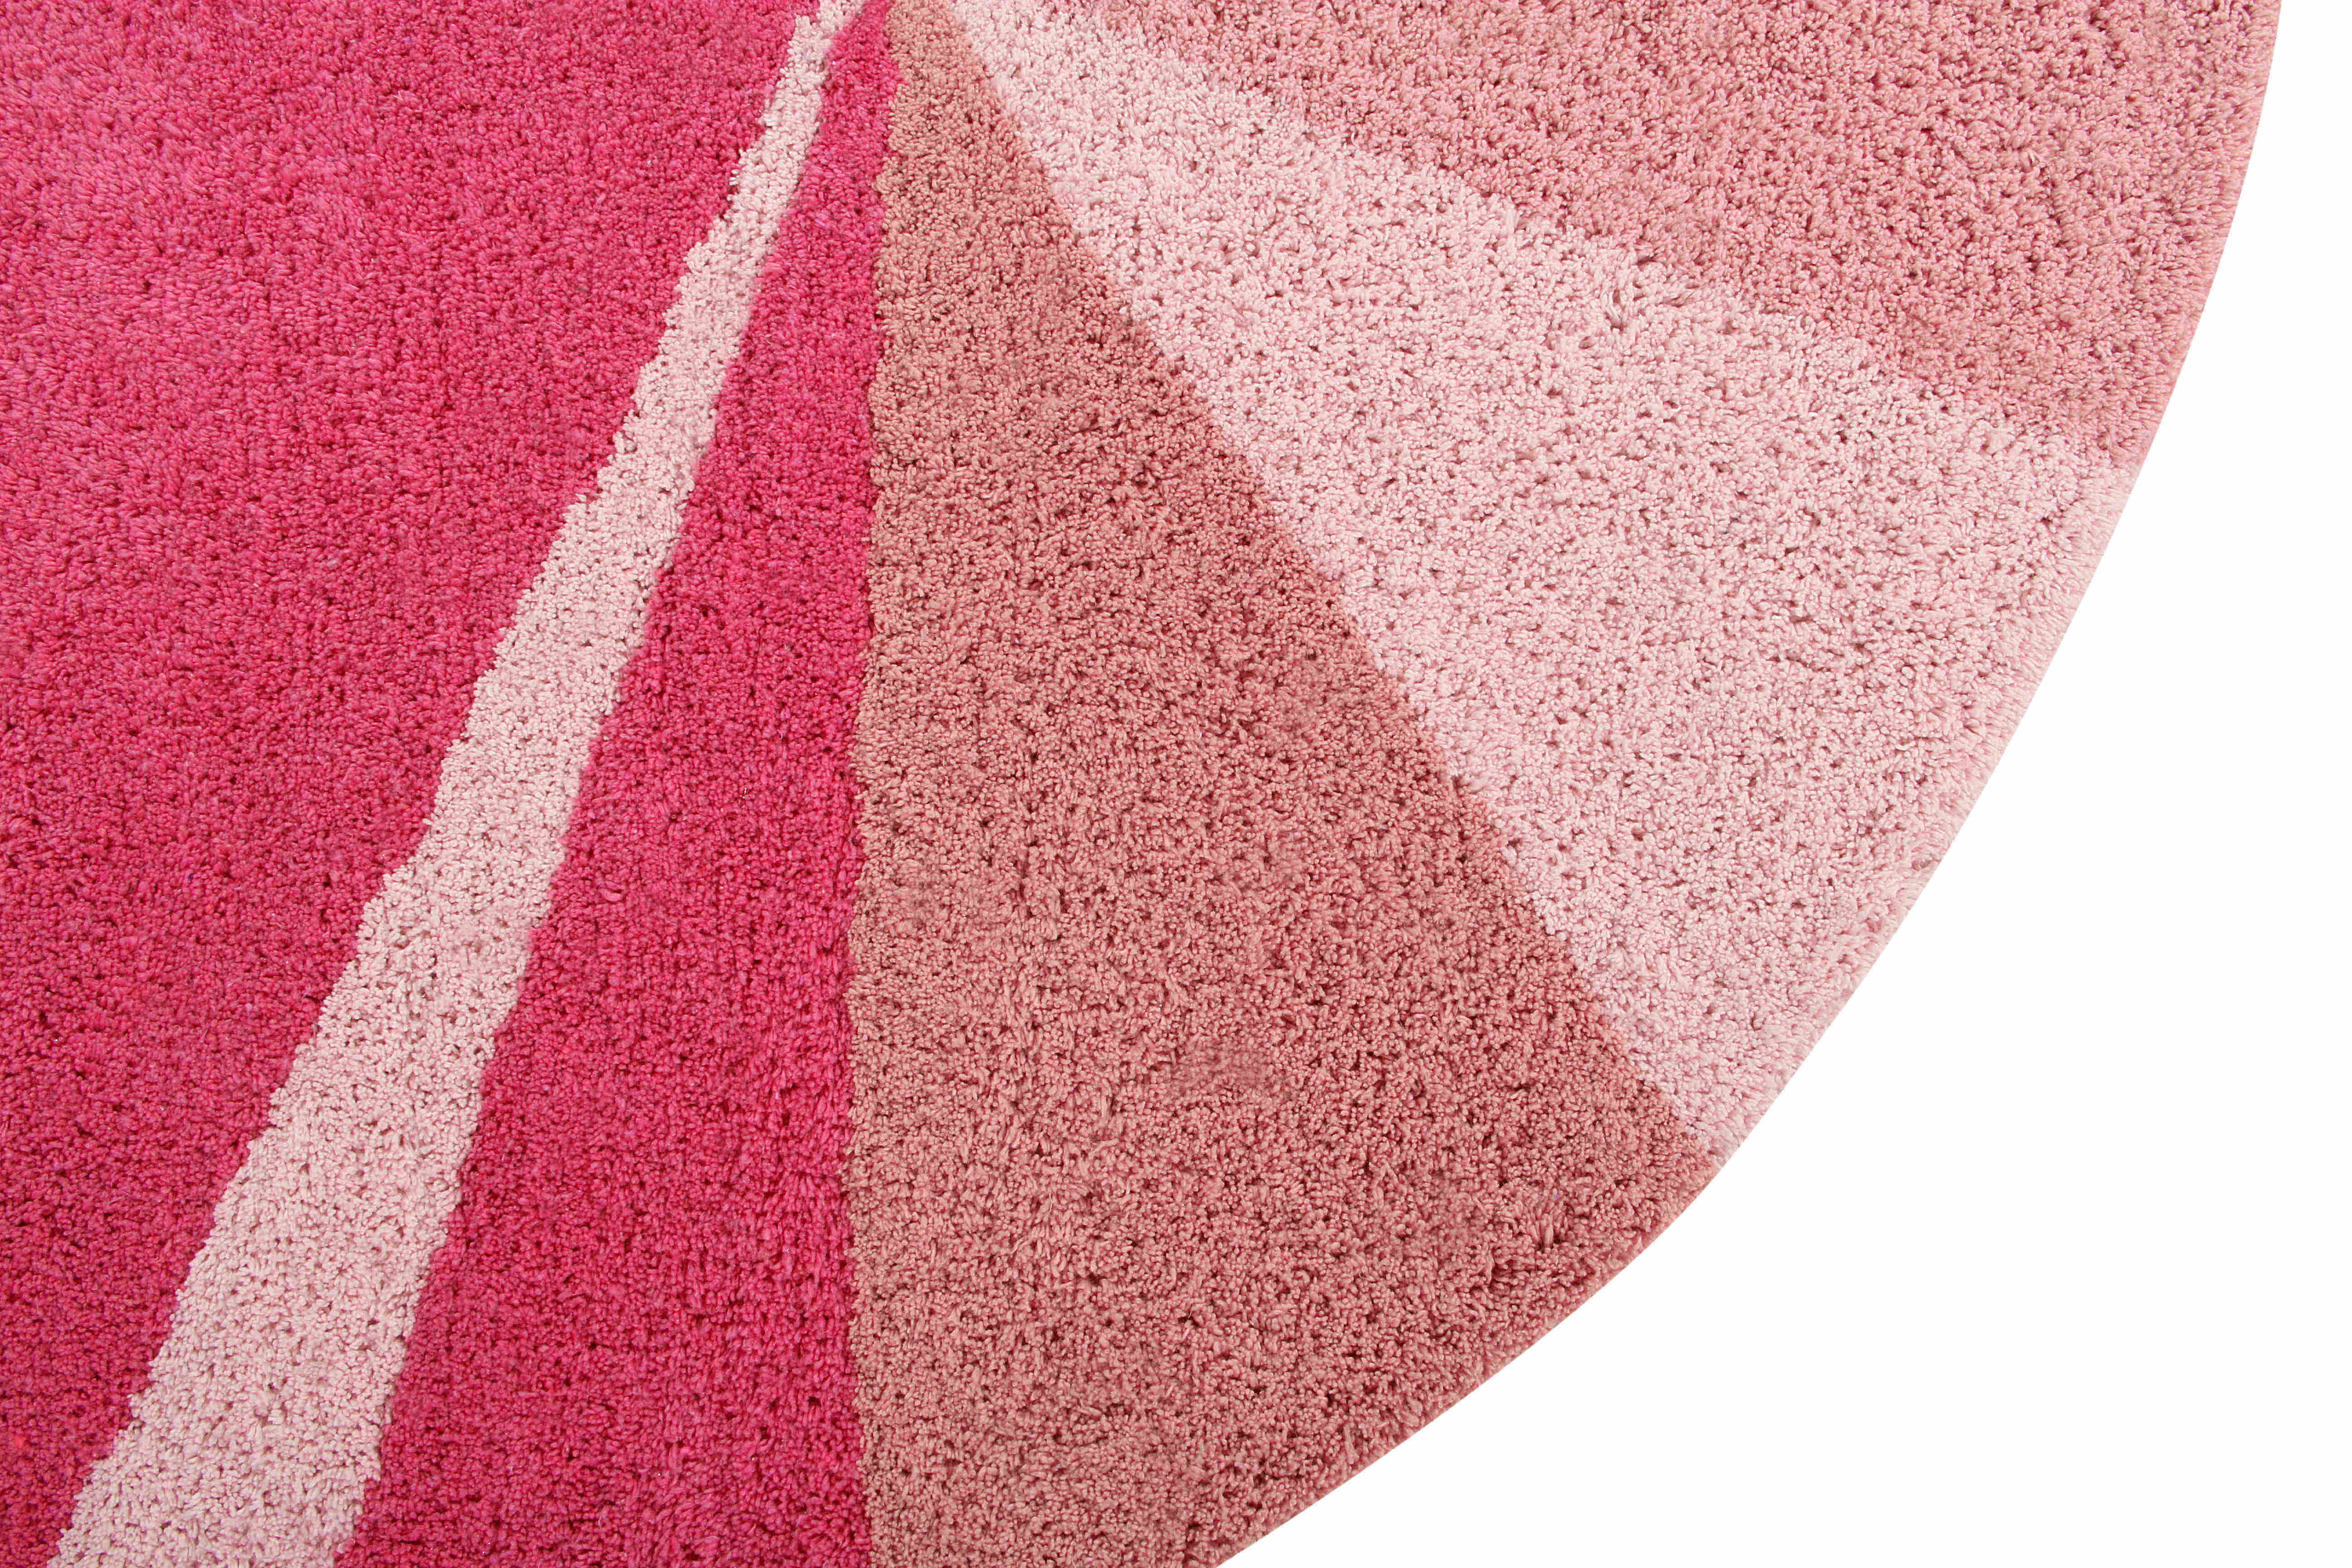 Circular cotton rug with abstract geometric triangle design in pink hues